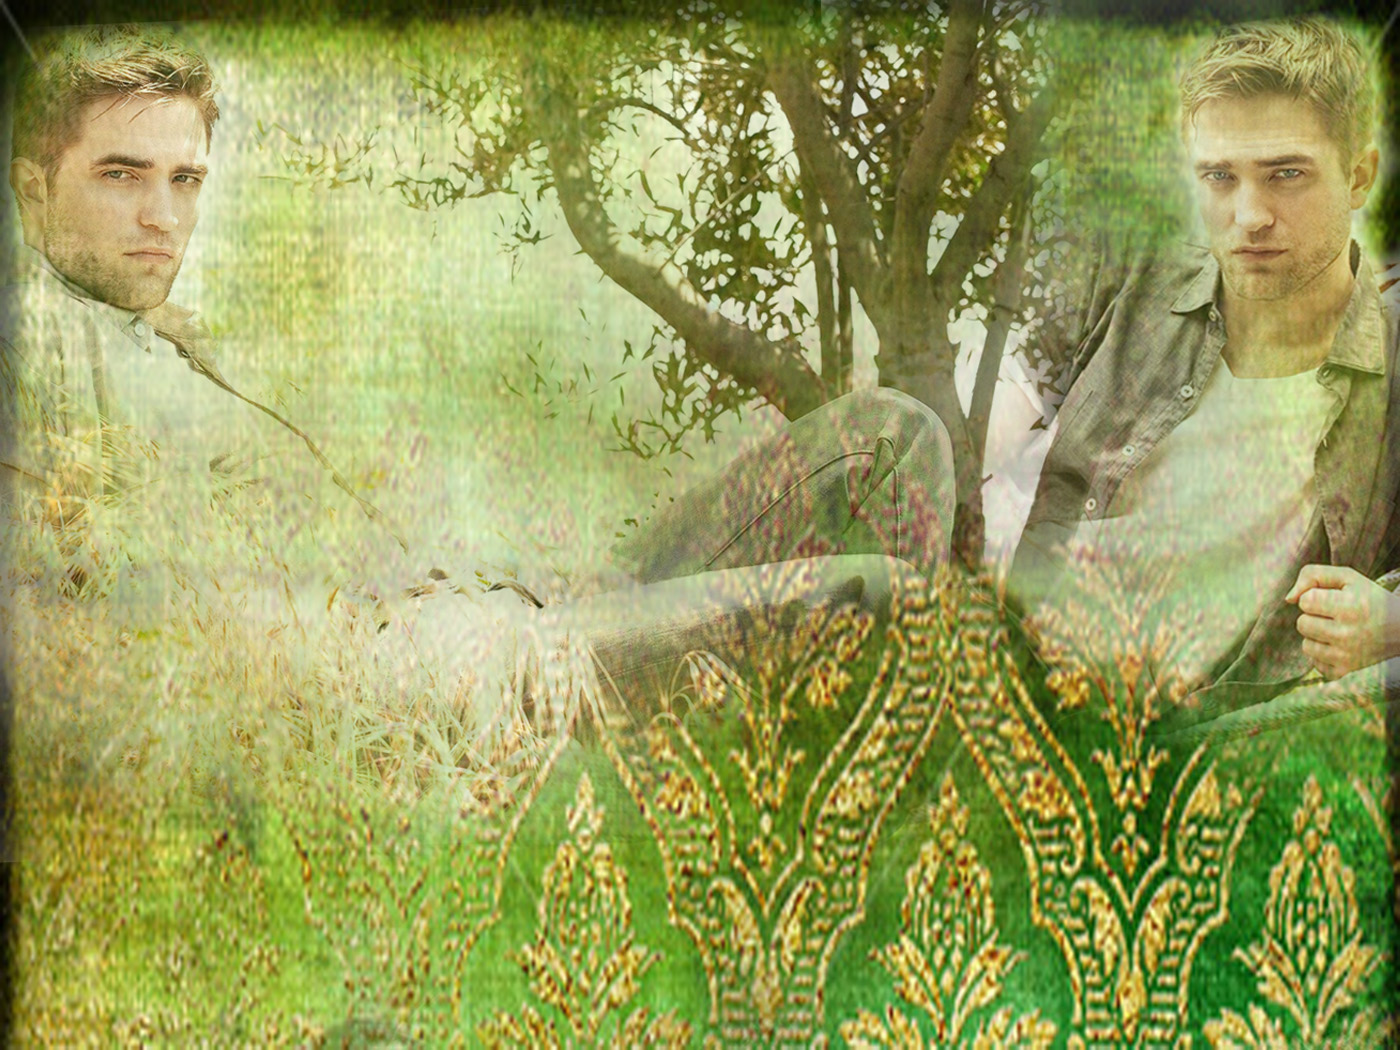 http://4.bp.blogspot.com/_1P_vYY2pers/TCAf1M0tYZI/AAAAAAAABJk/sylWrgMoQl4/s1600/stock-pao-green-vintage-background-with-golden-patterns-20856820.jpg